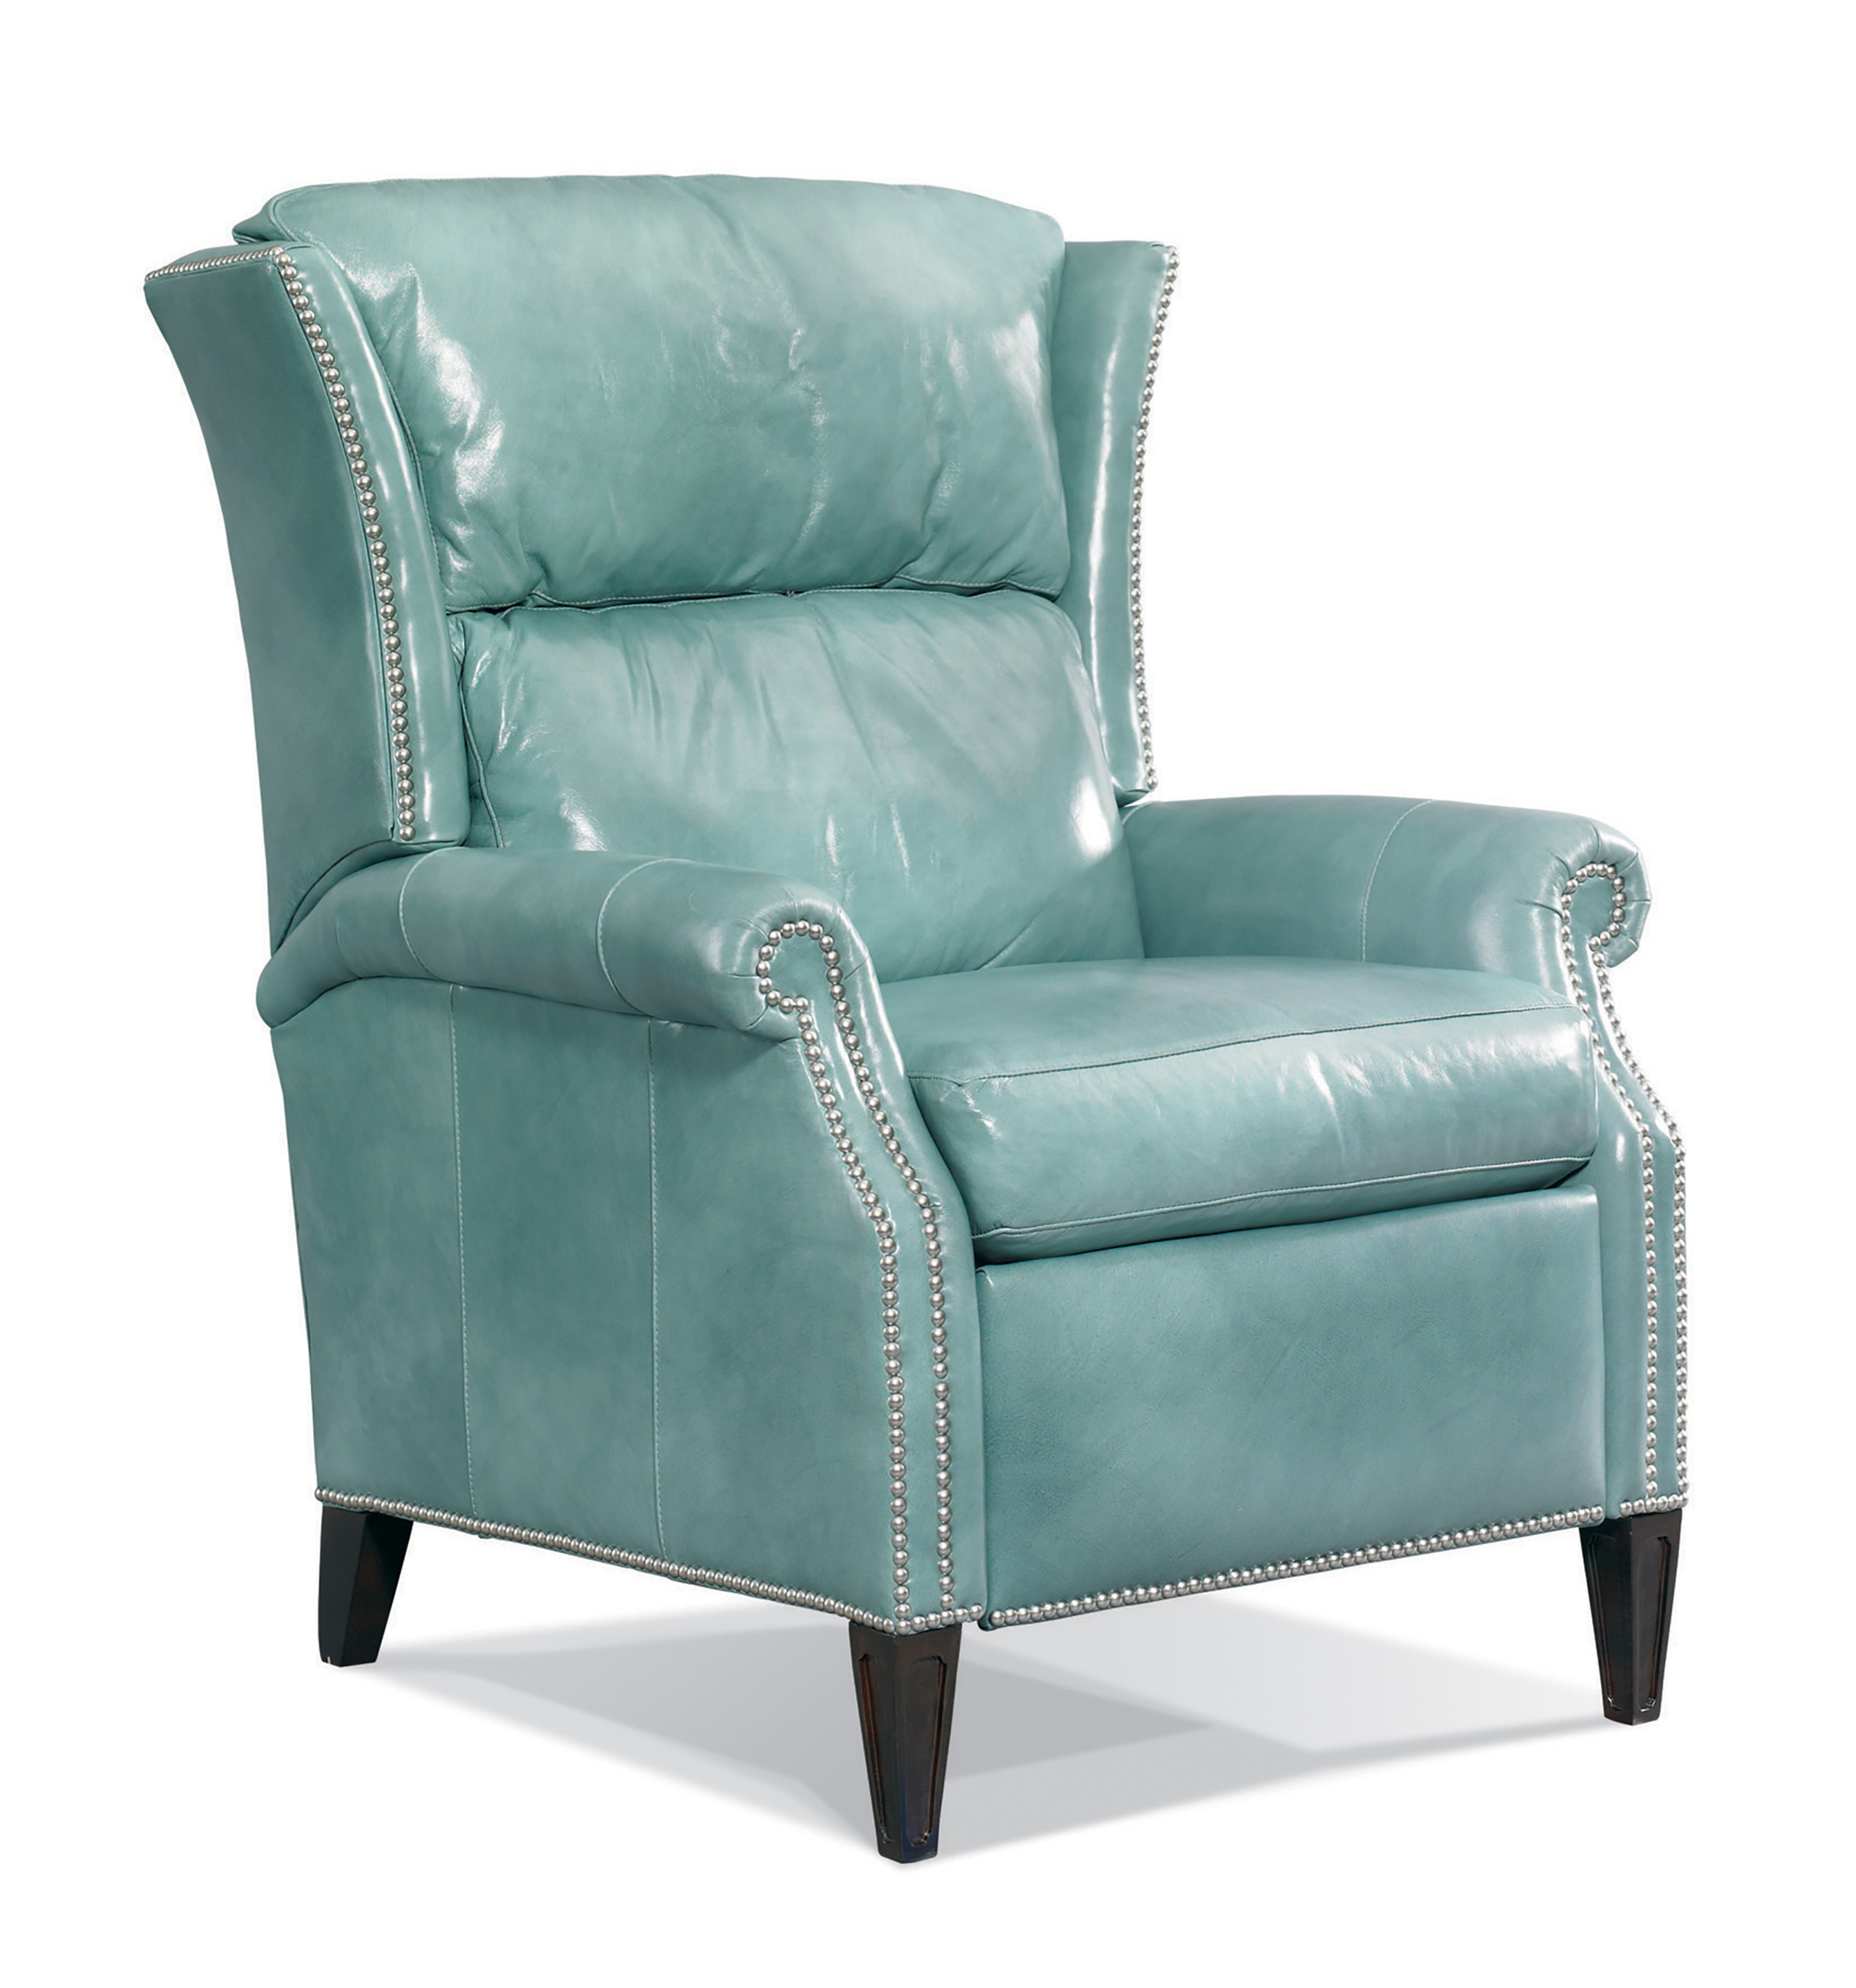 Reclining wingback chair